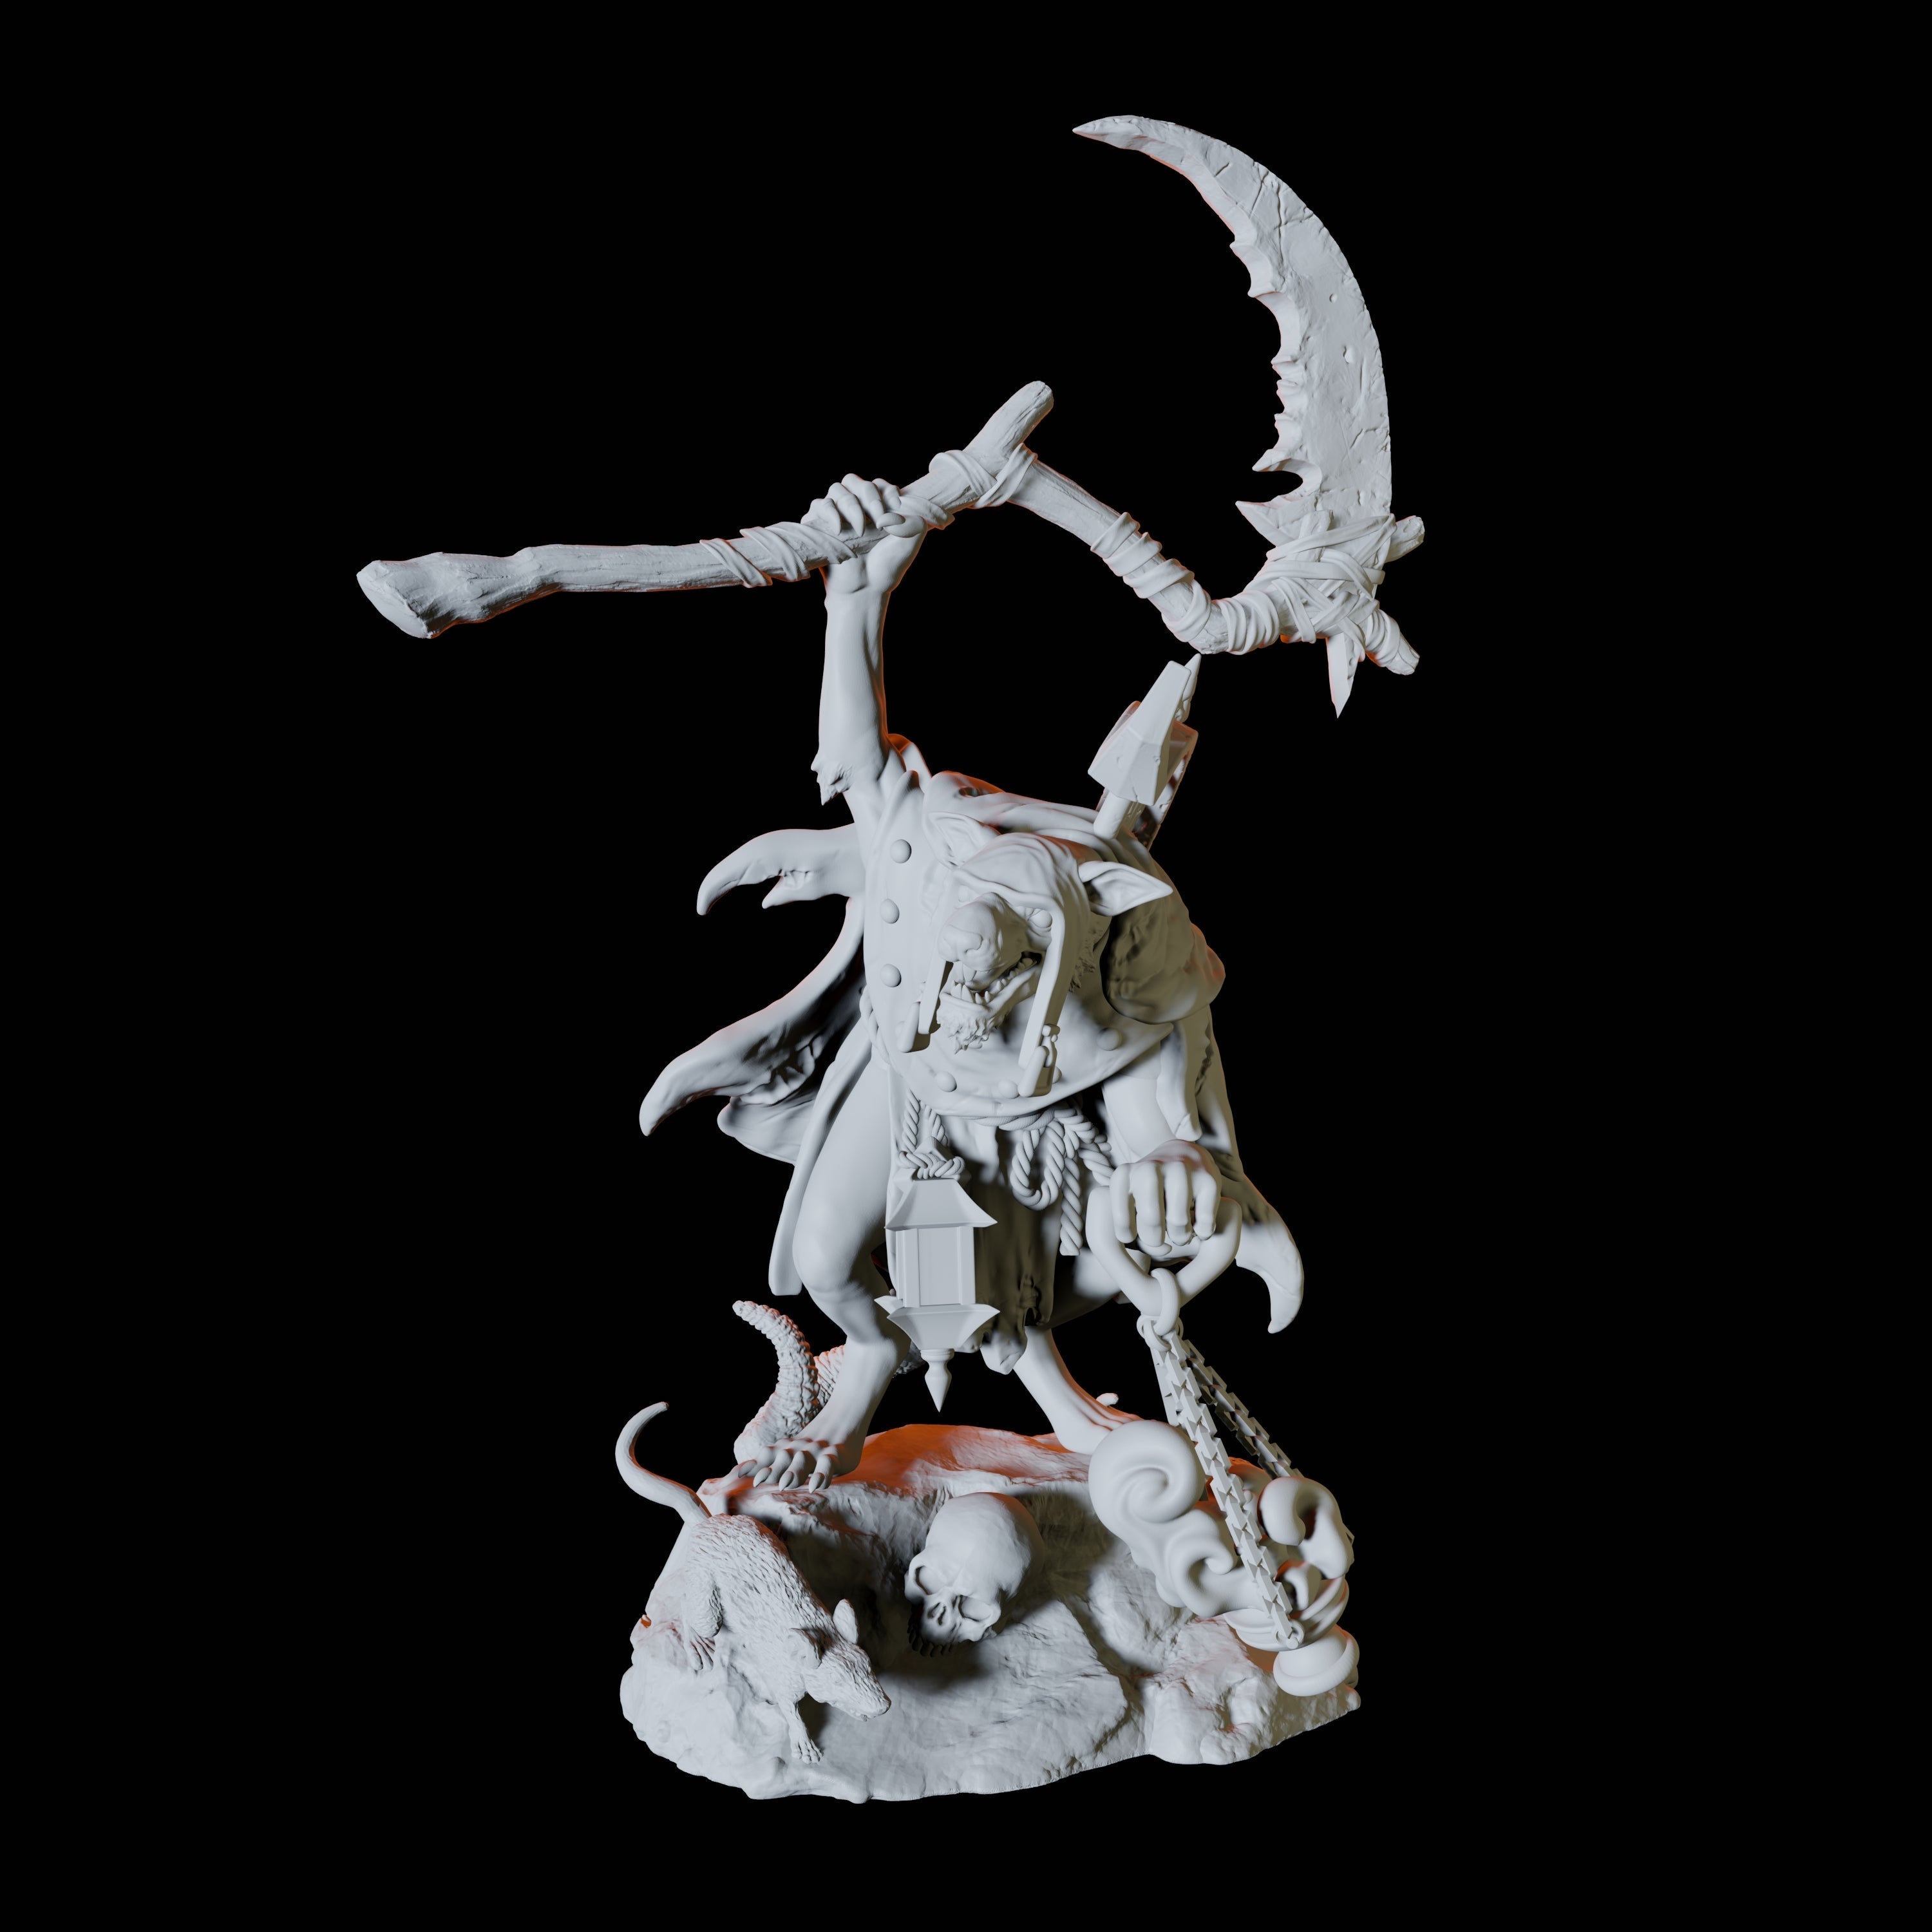 Crusader Ratfolk C Miniature for Dungeons and Dragons, Pathfinder or other TTRPGs